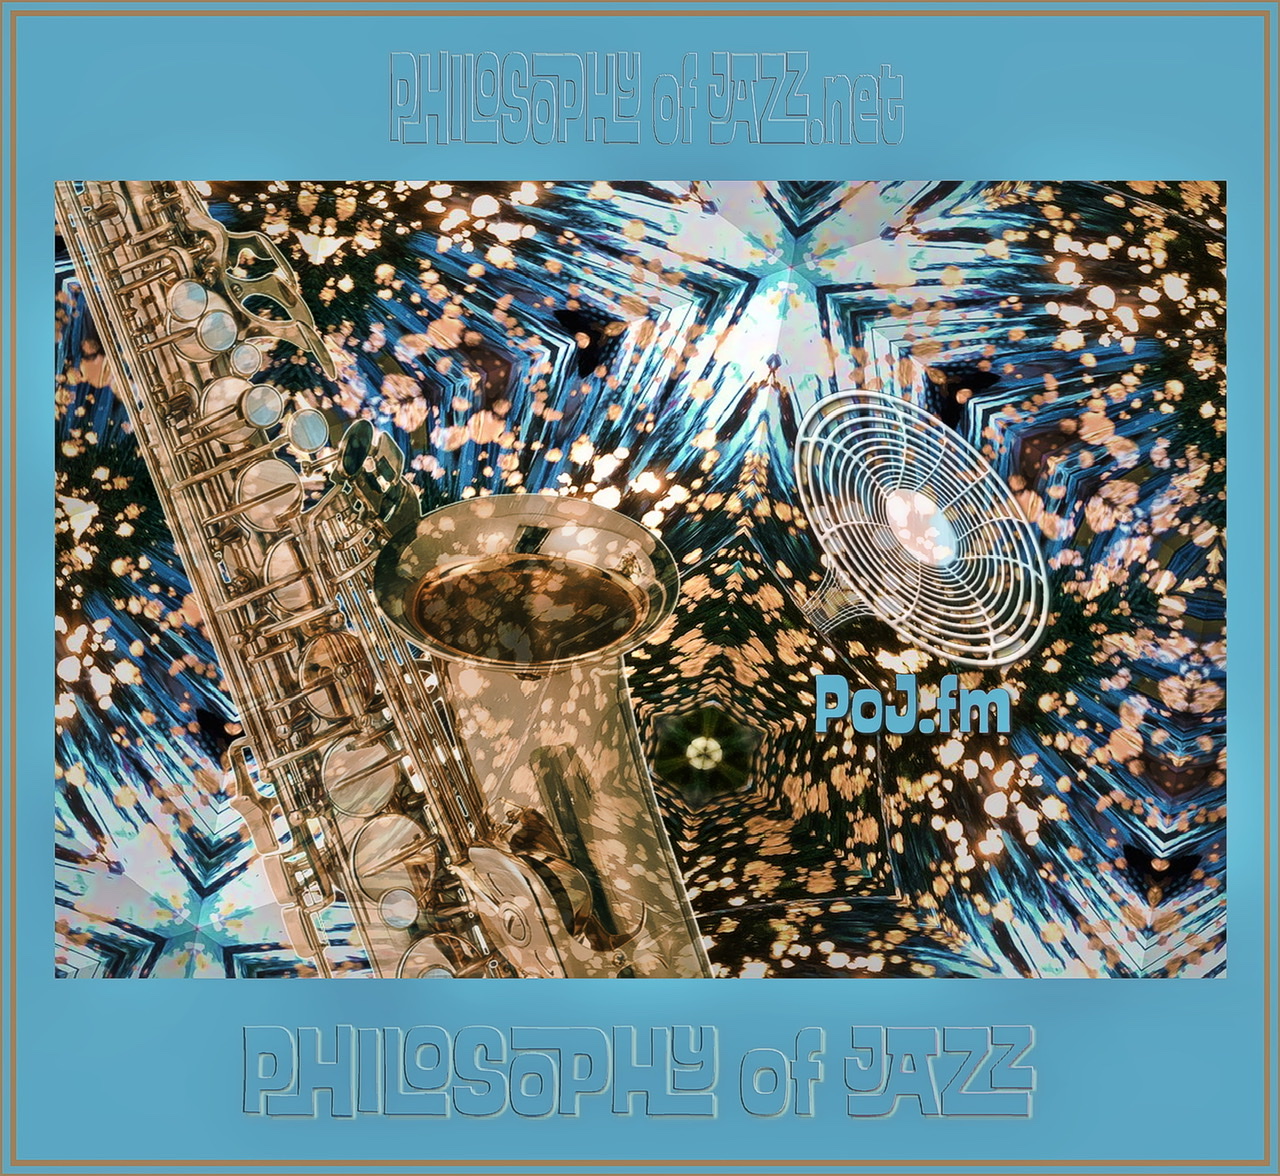 A framed graphic of a shiny coppery saxophone on left side on a powder blue background with exploding abstract graphics on the rest with PoJ.fm logos.